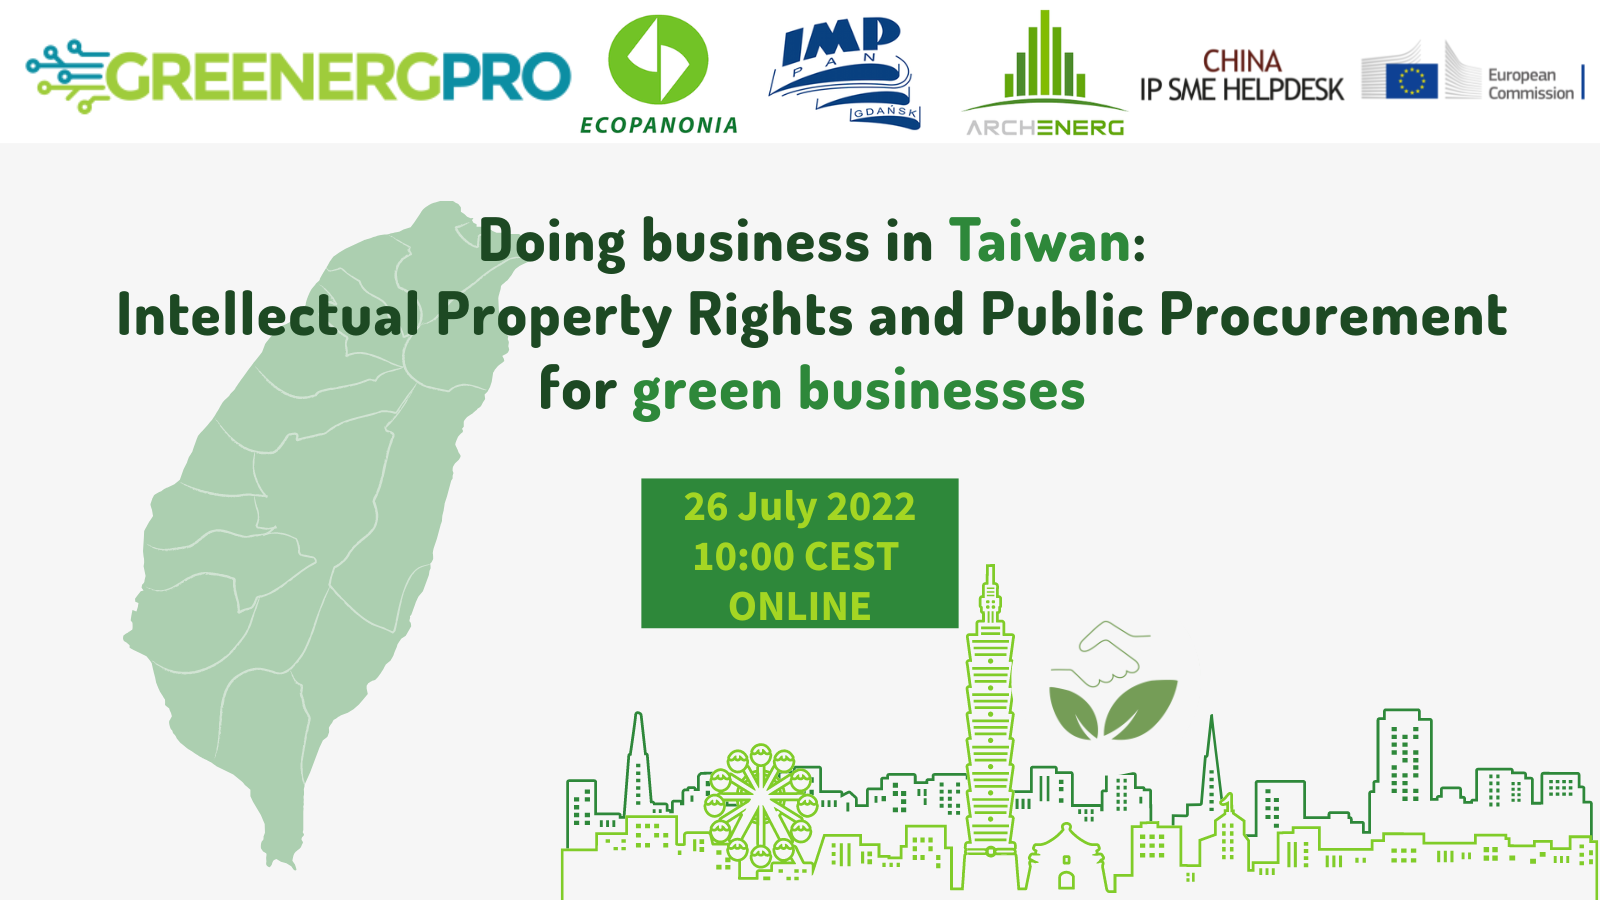 Doing business in Taiwan - Intellectual Property Rights and Public Procurement